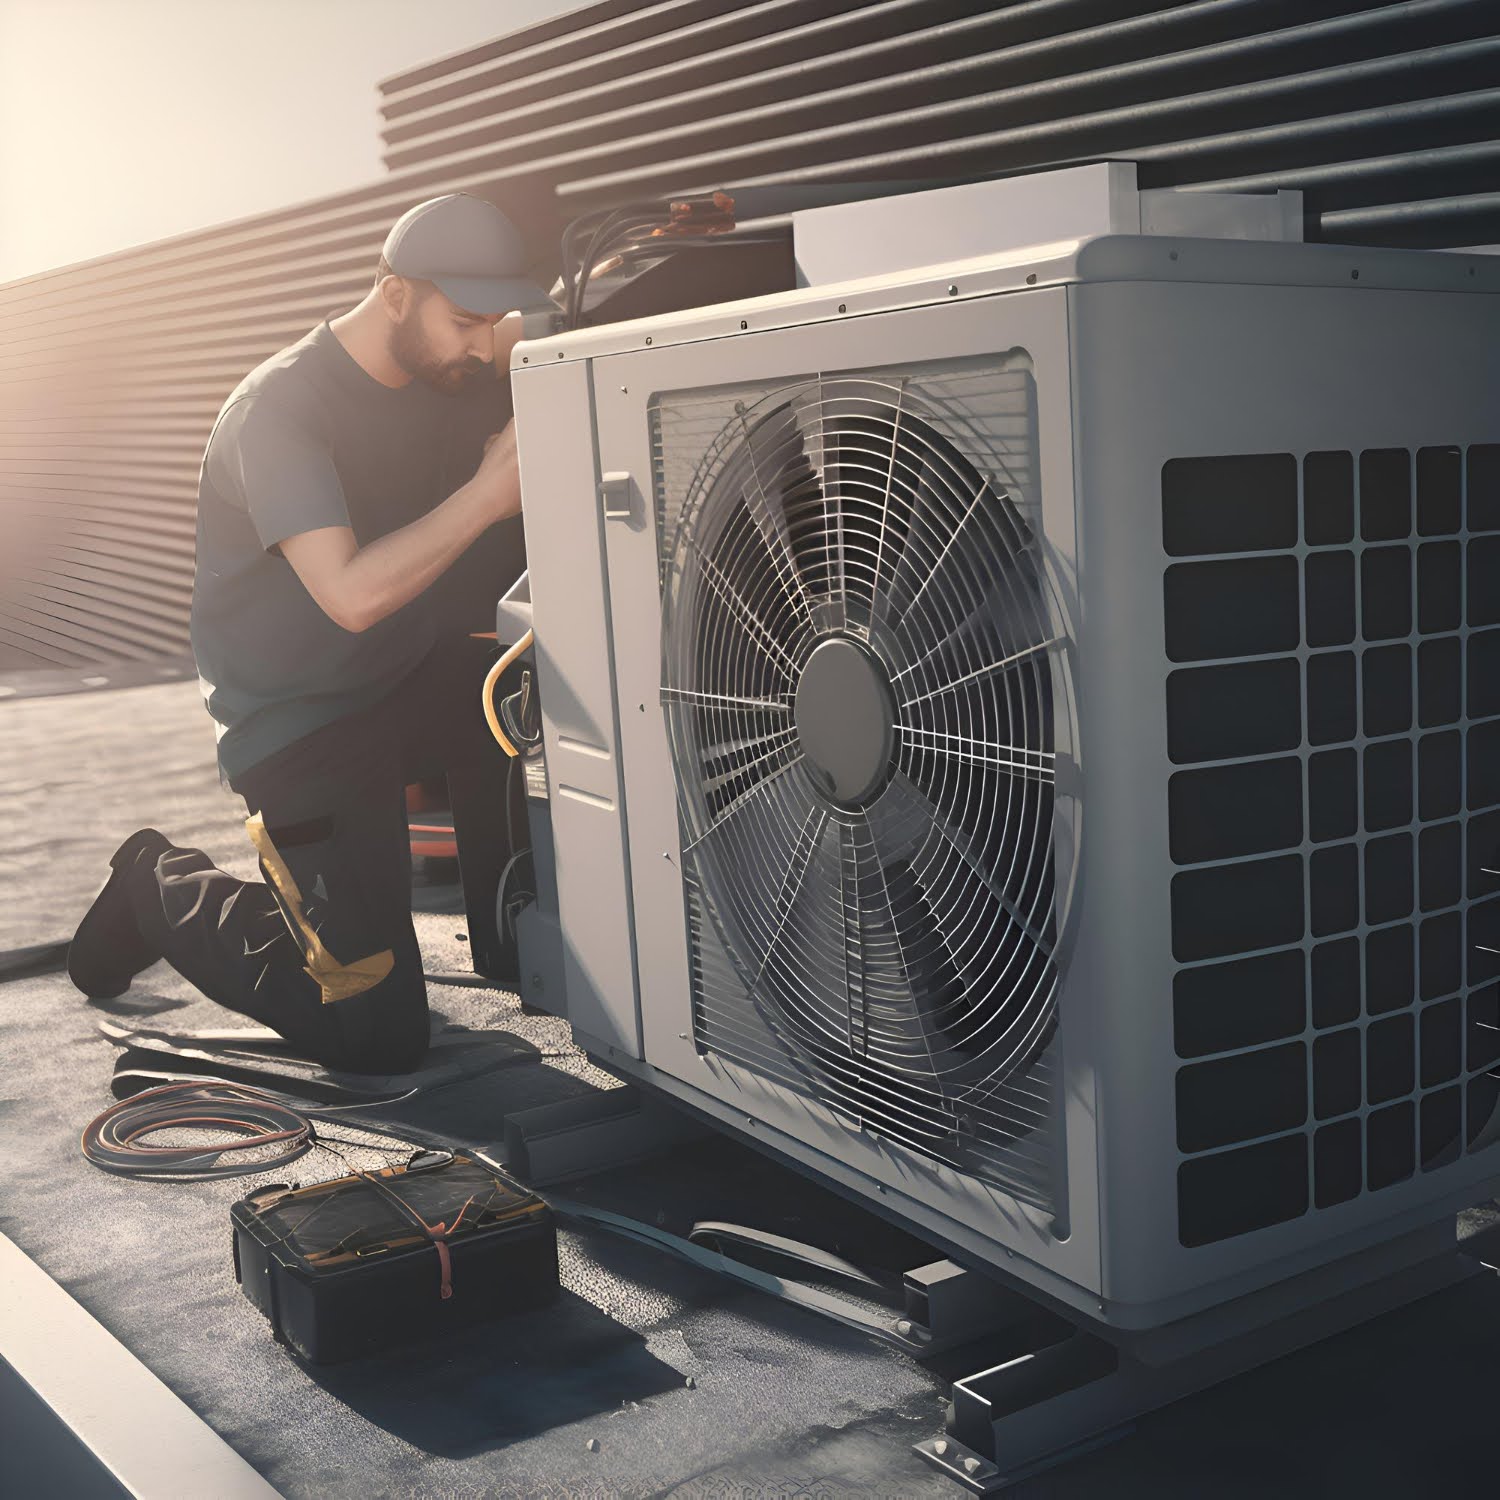 Guy working on commercial AC system